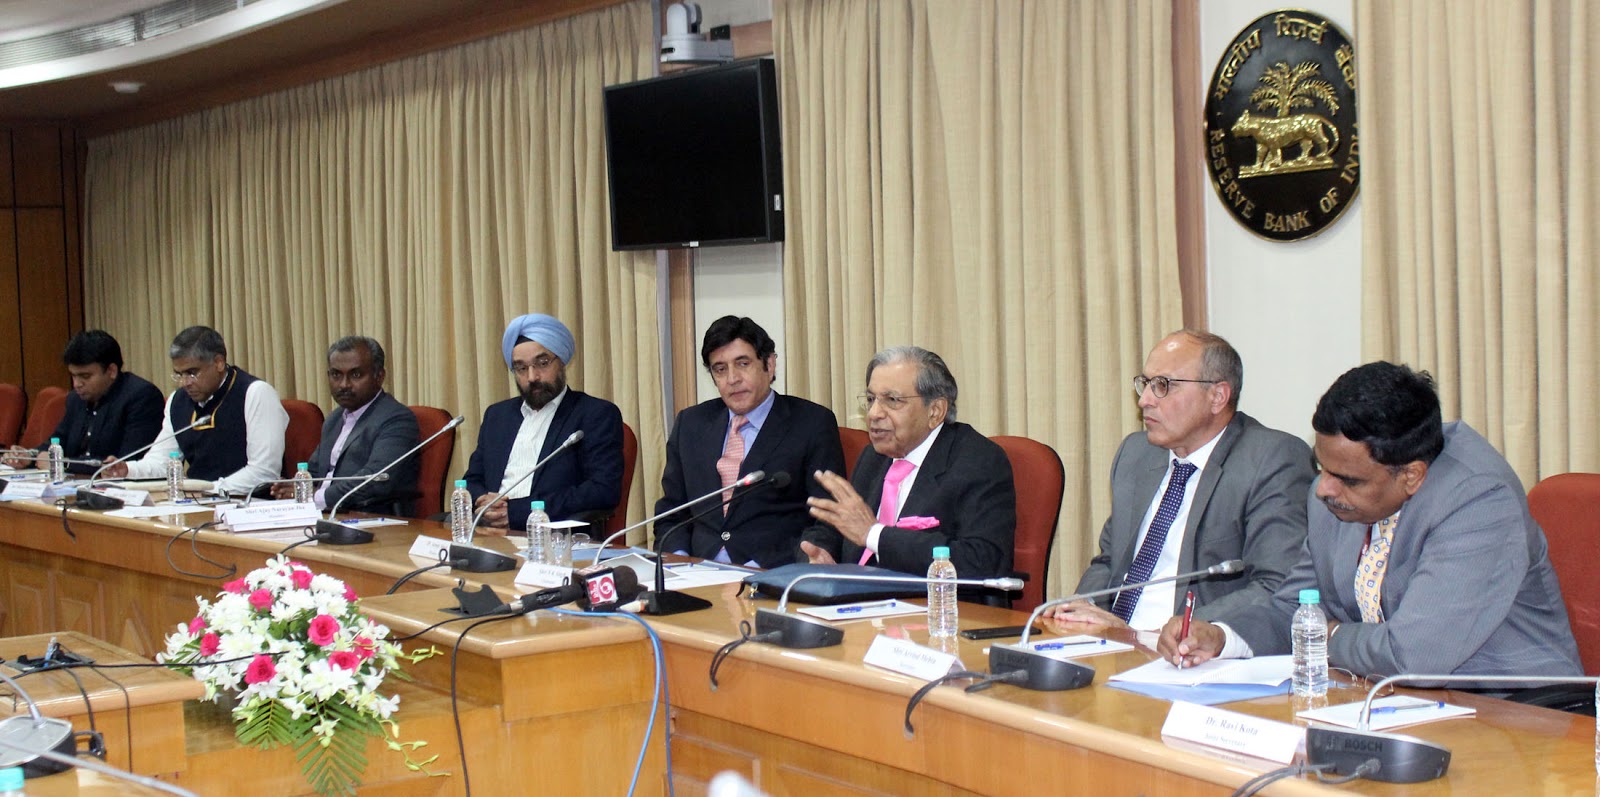 15th Finance Commission concludes two-day visit to Mumbai